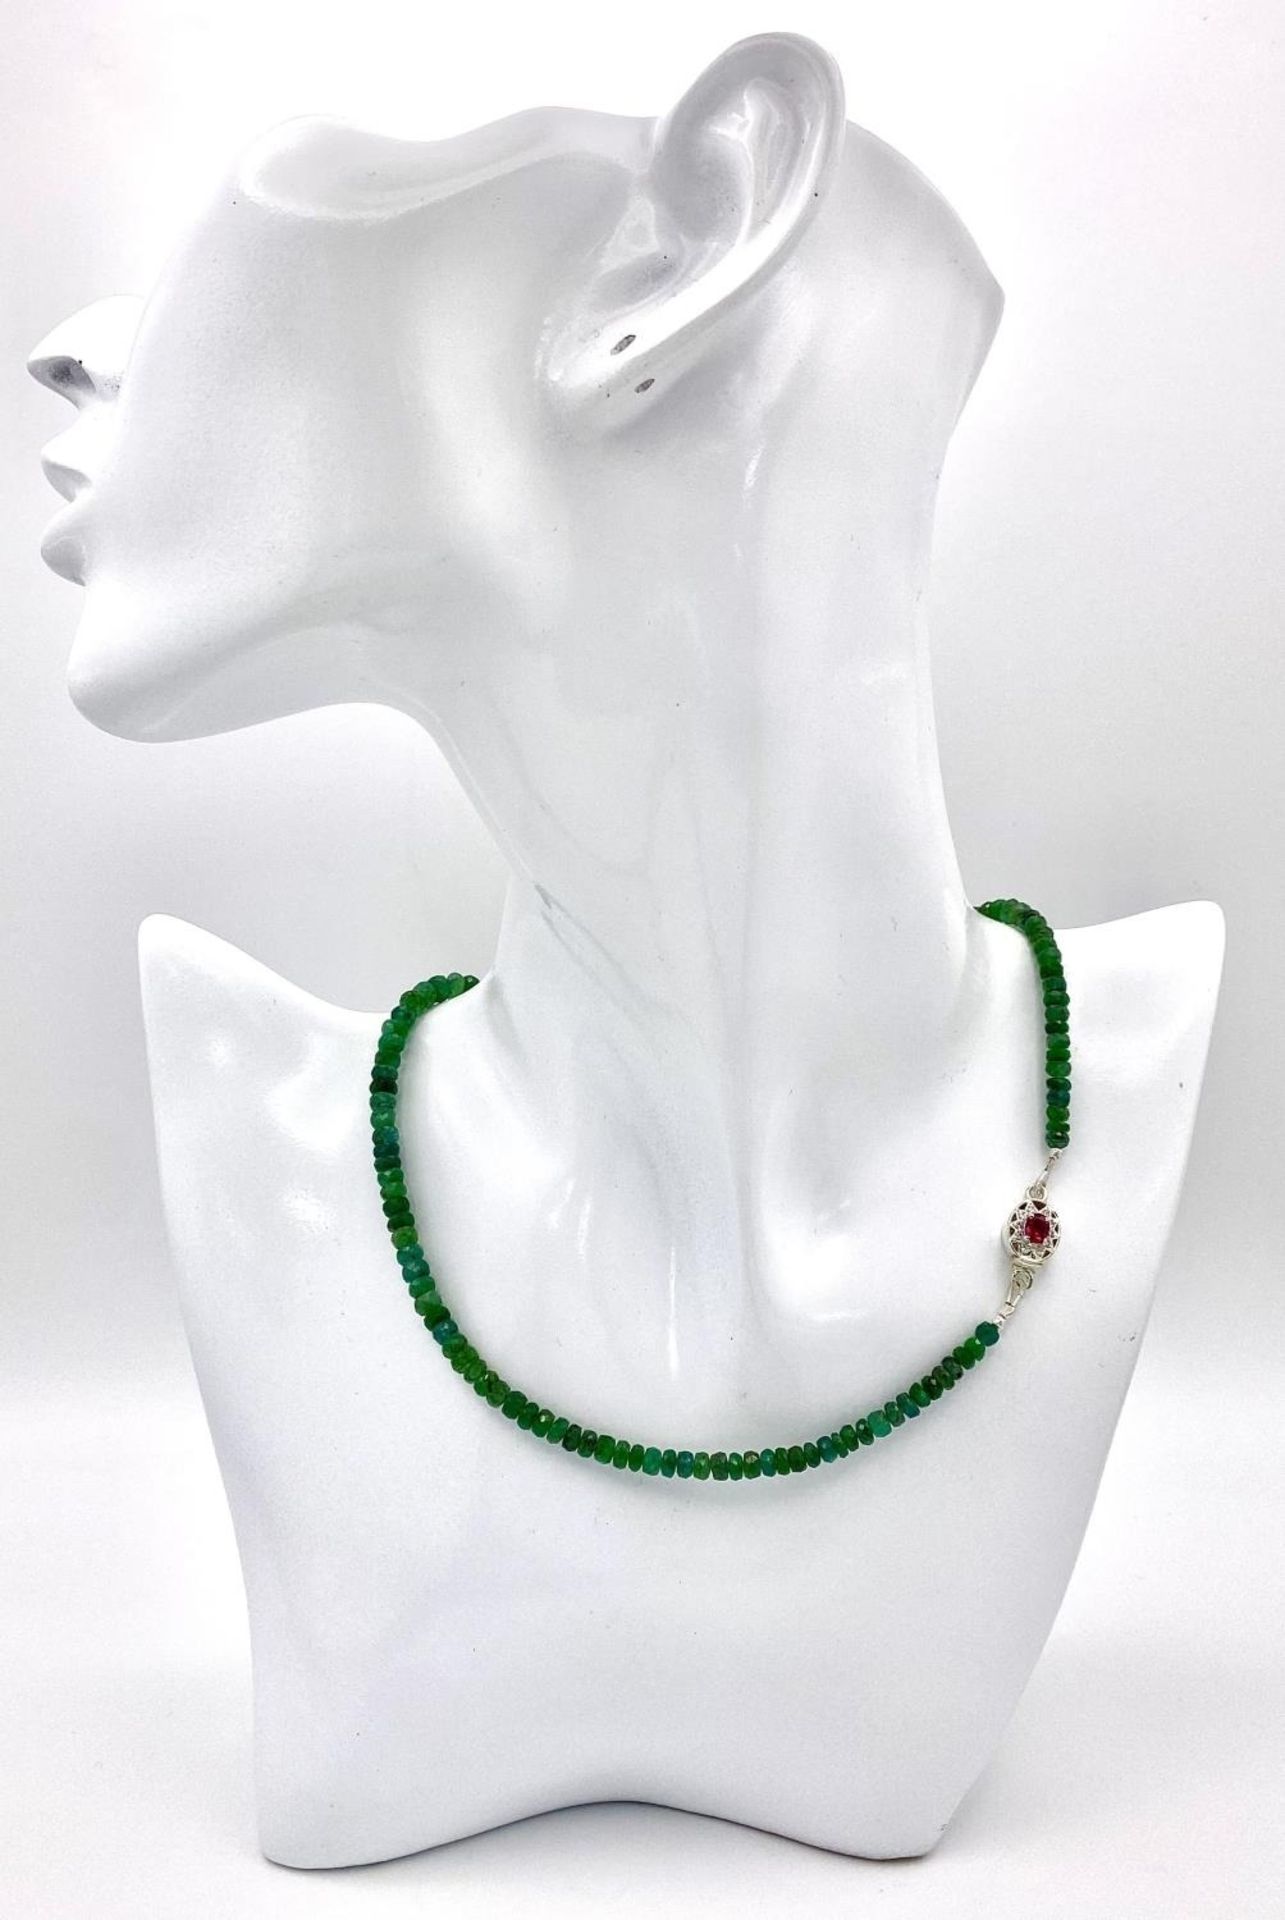 A 90ctw Single Strand Emerald Rondelle Necklace with a Ruby and 925 Silver Clasp. 42cm length. - Image 2 of 5